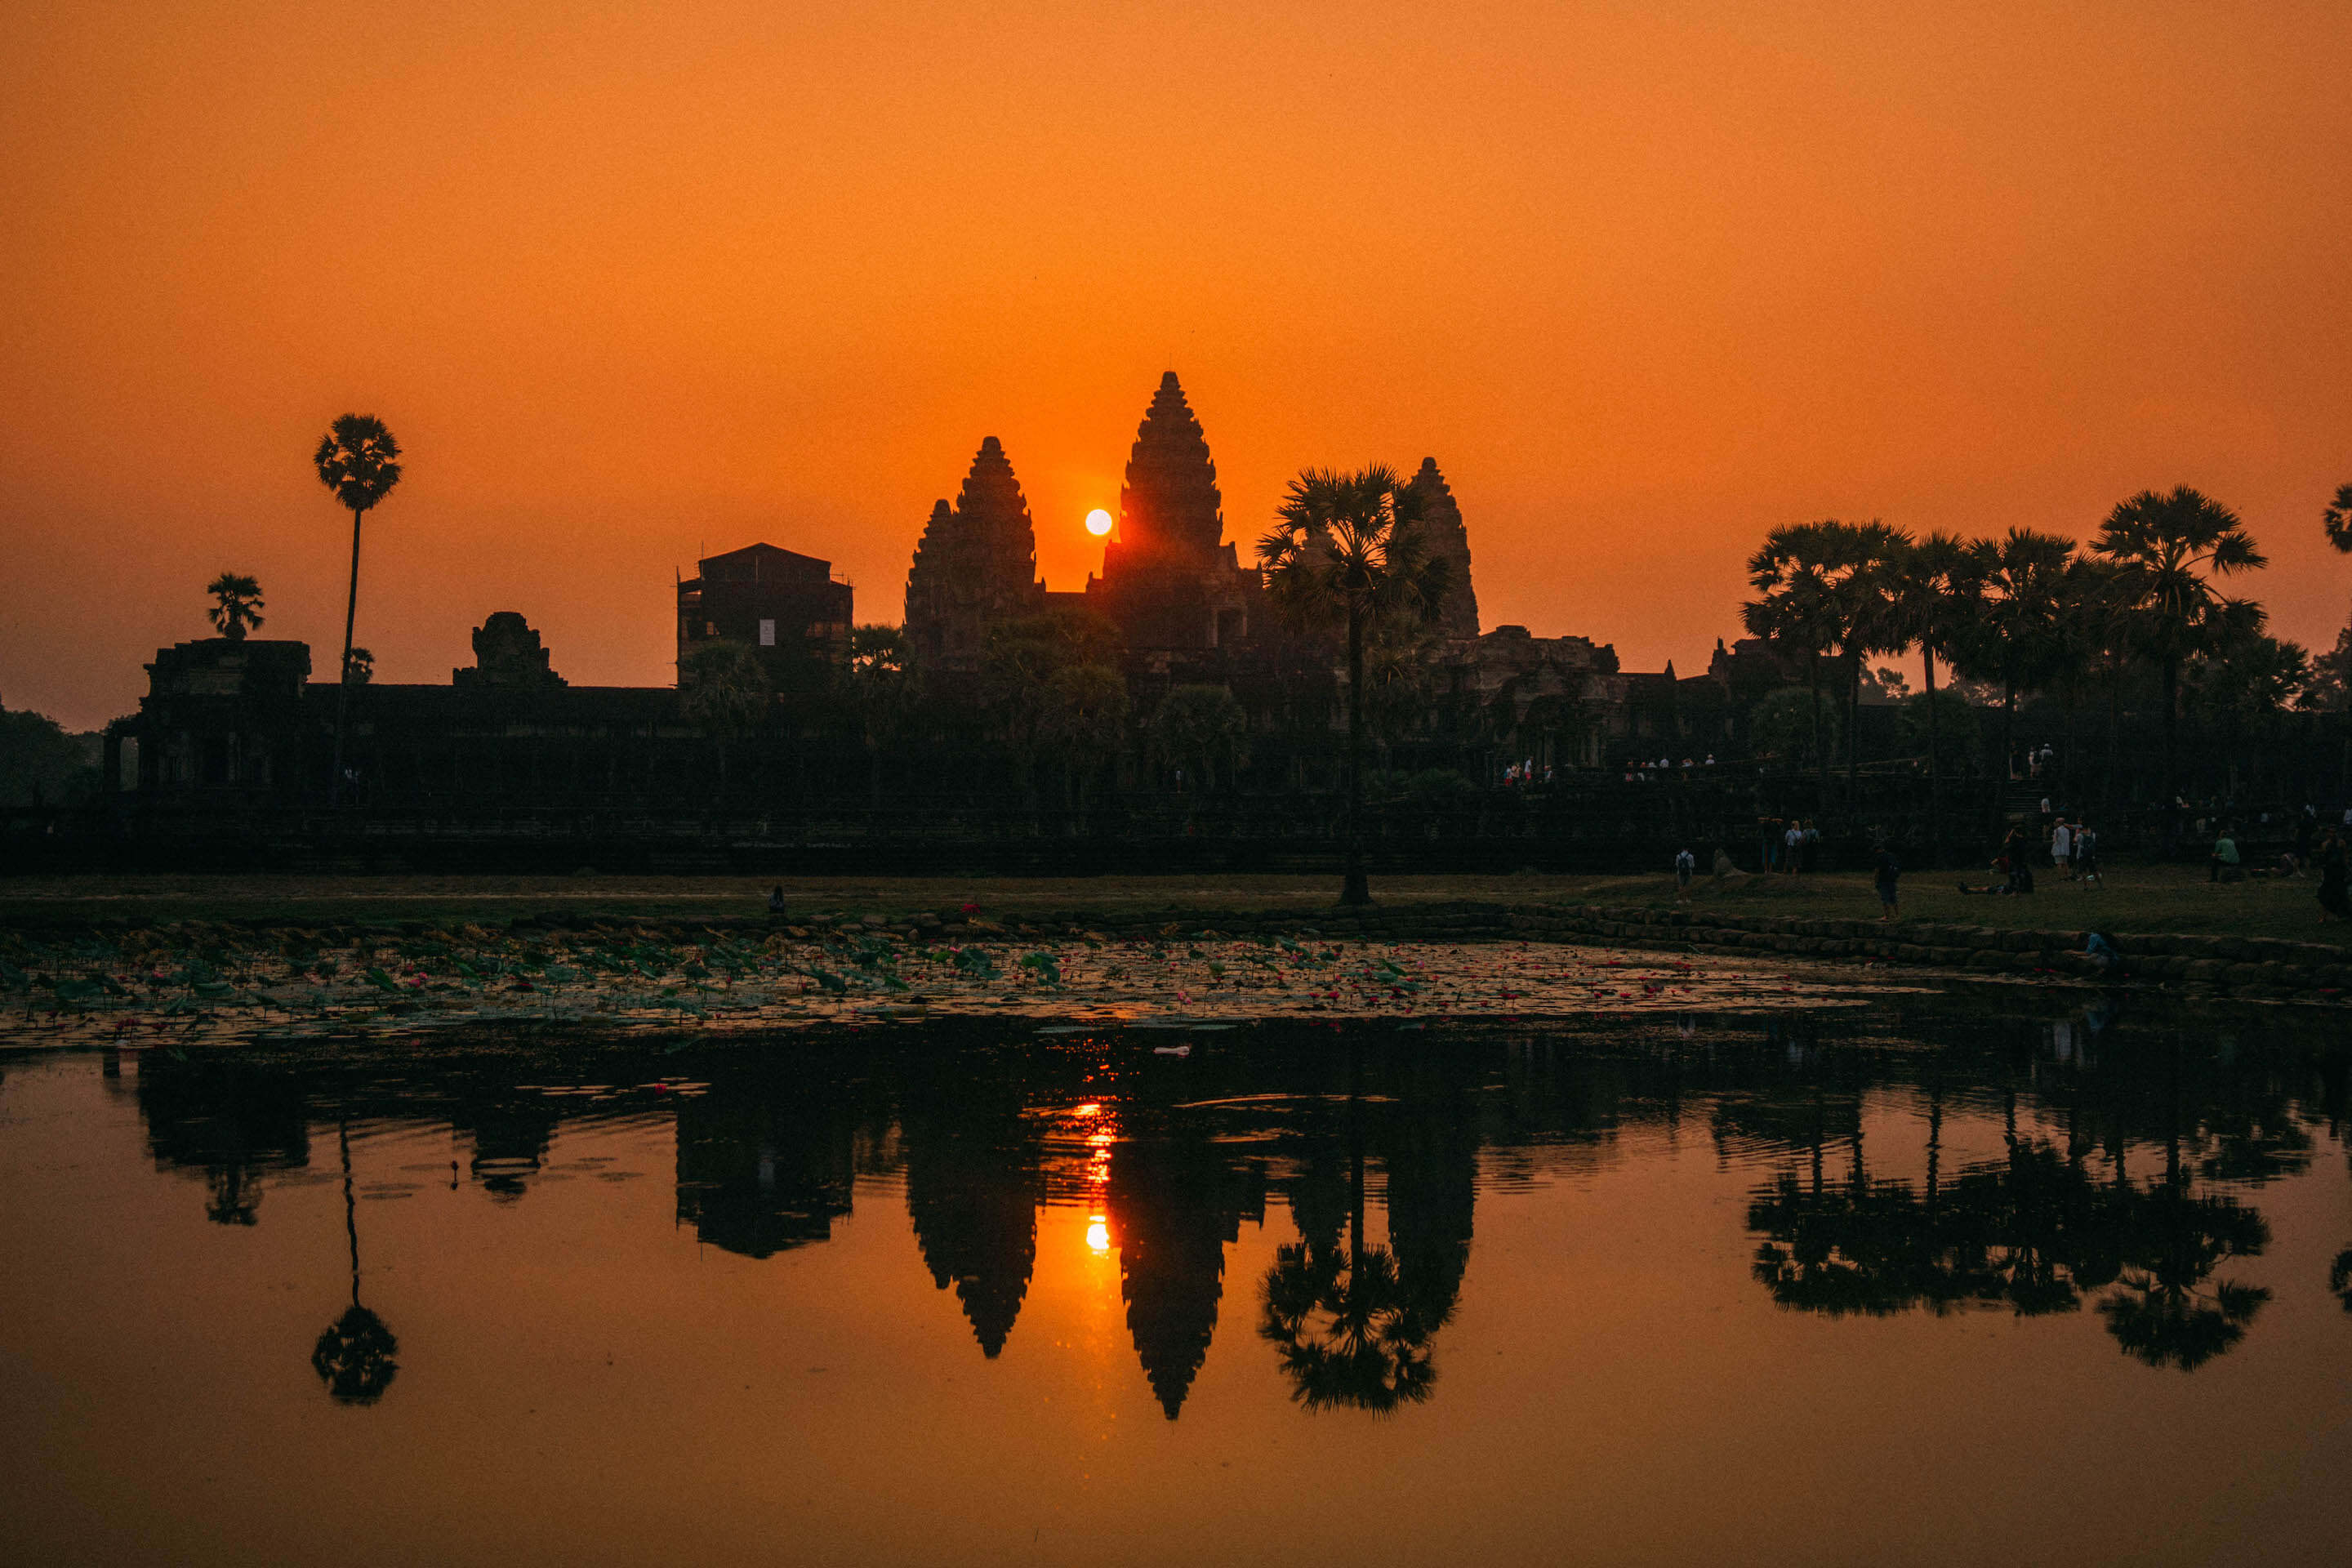 Siem Reap, Angkor Wat, What to do in Siem Reap, Siem Reap Guide, Cambodia, Best Photos of Angkor Wat, Angkor Wat in a day, Wanderluluu, Angkor Wat sunrise photo, Angkor Wat at sunrise